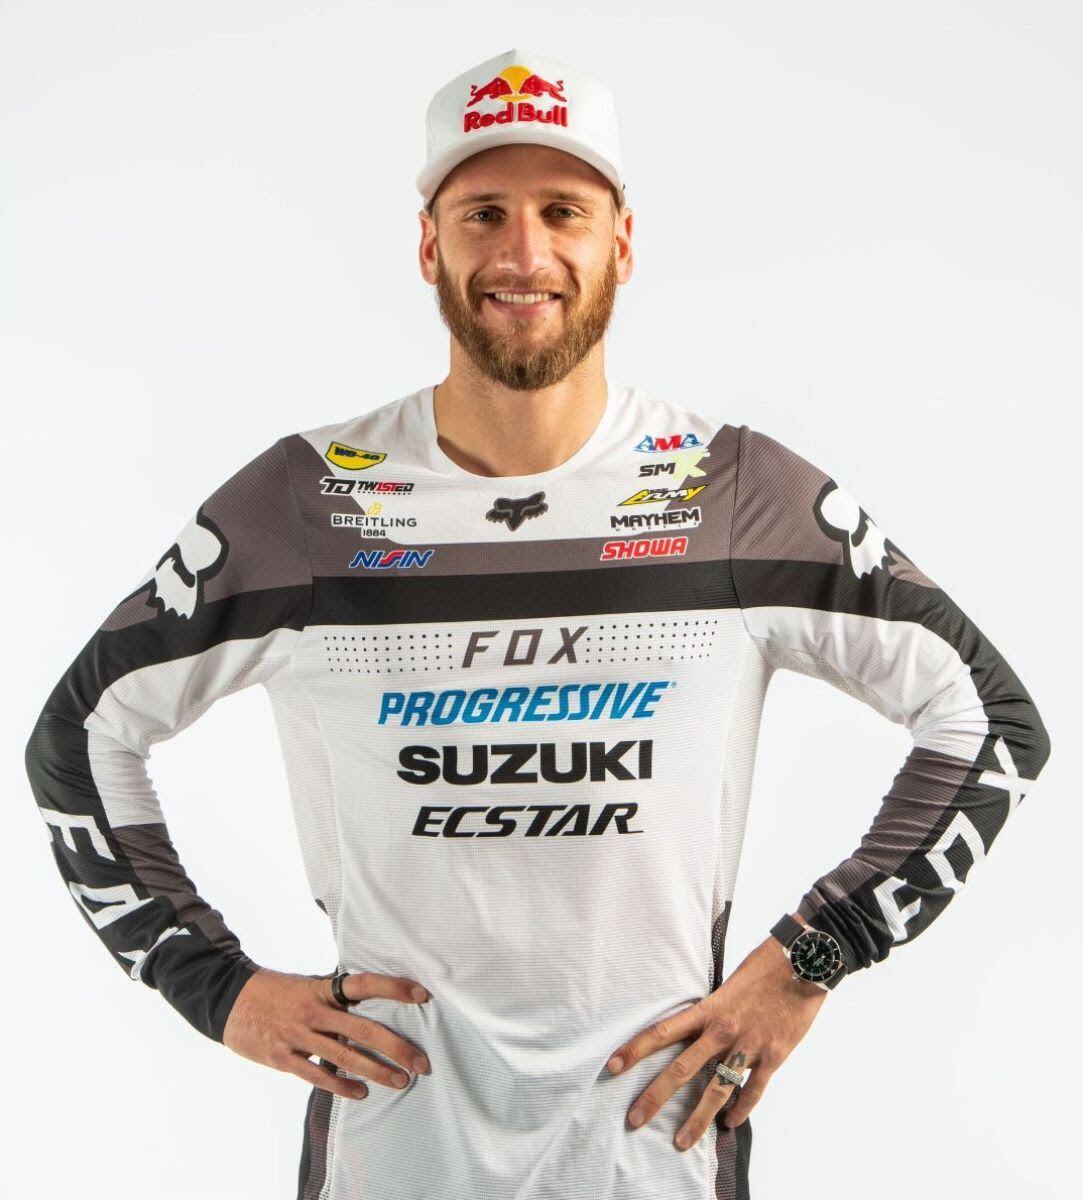 The German rider retains Red Bull and Fox Racing as personal sponsors.